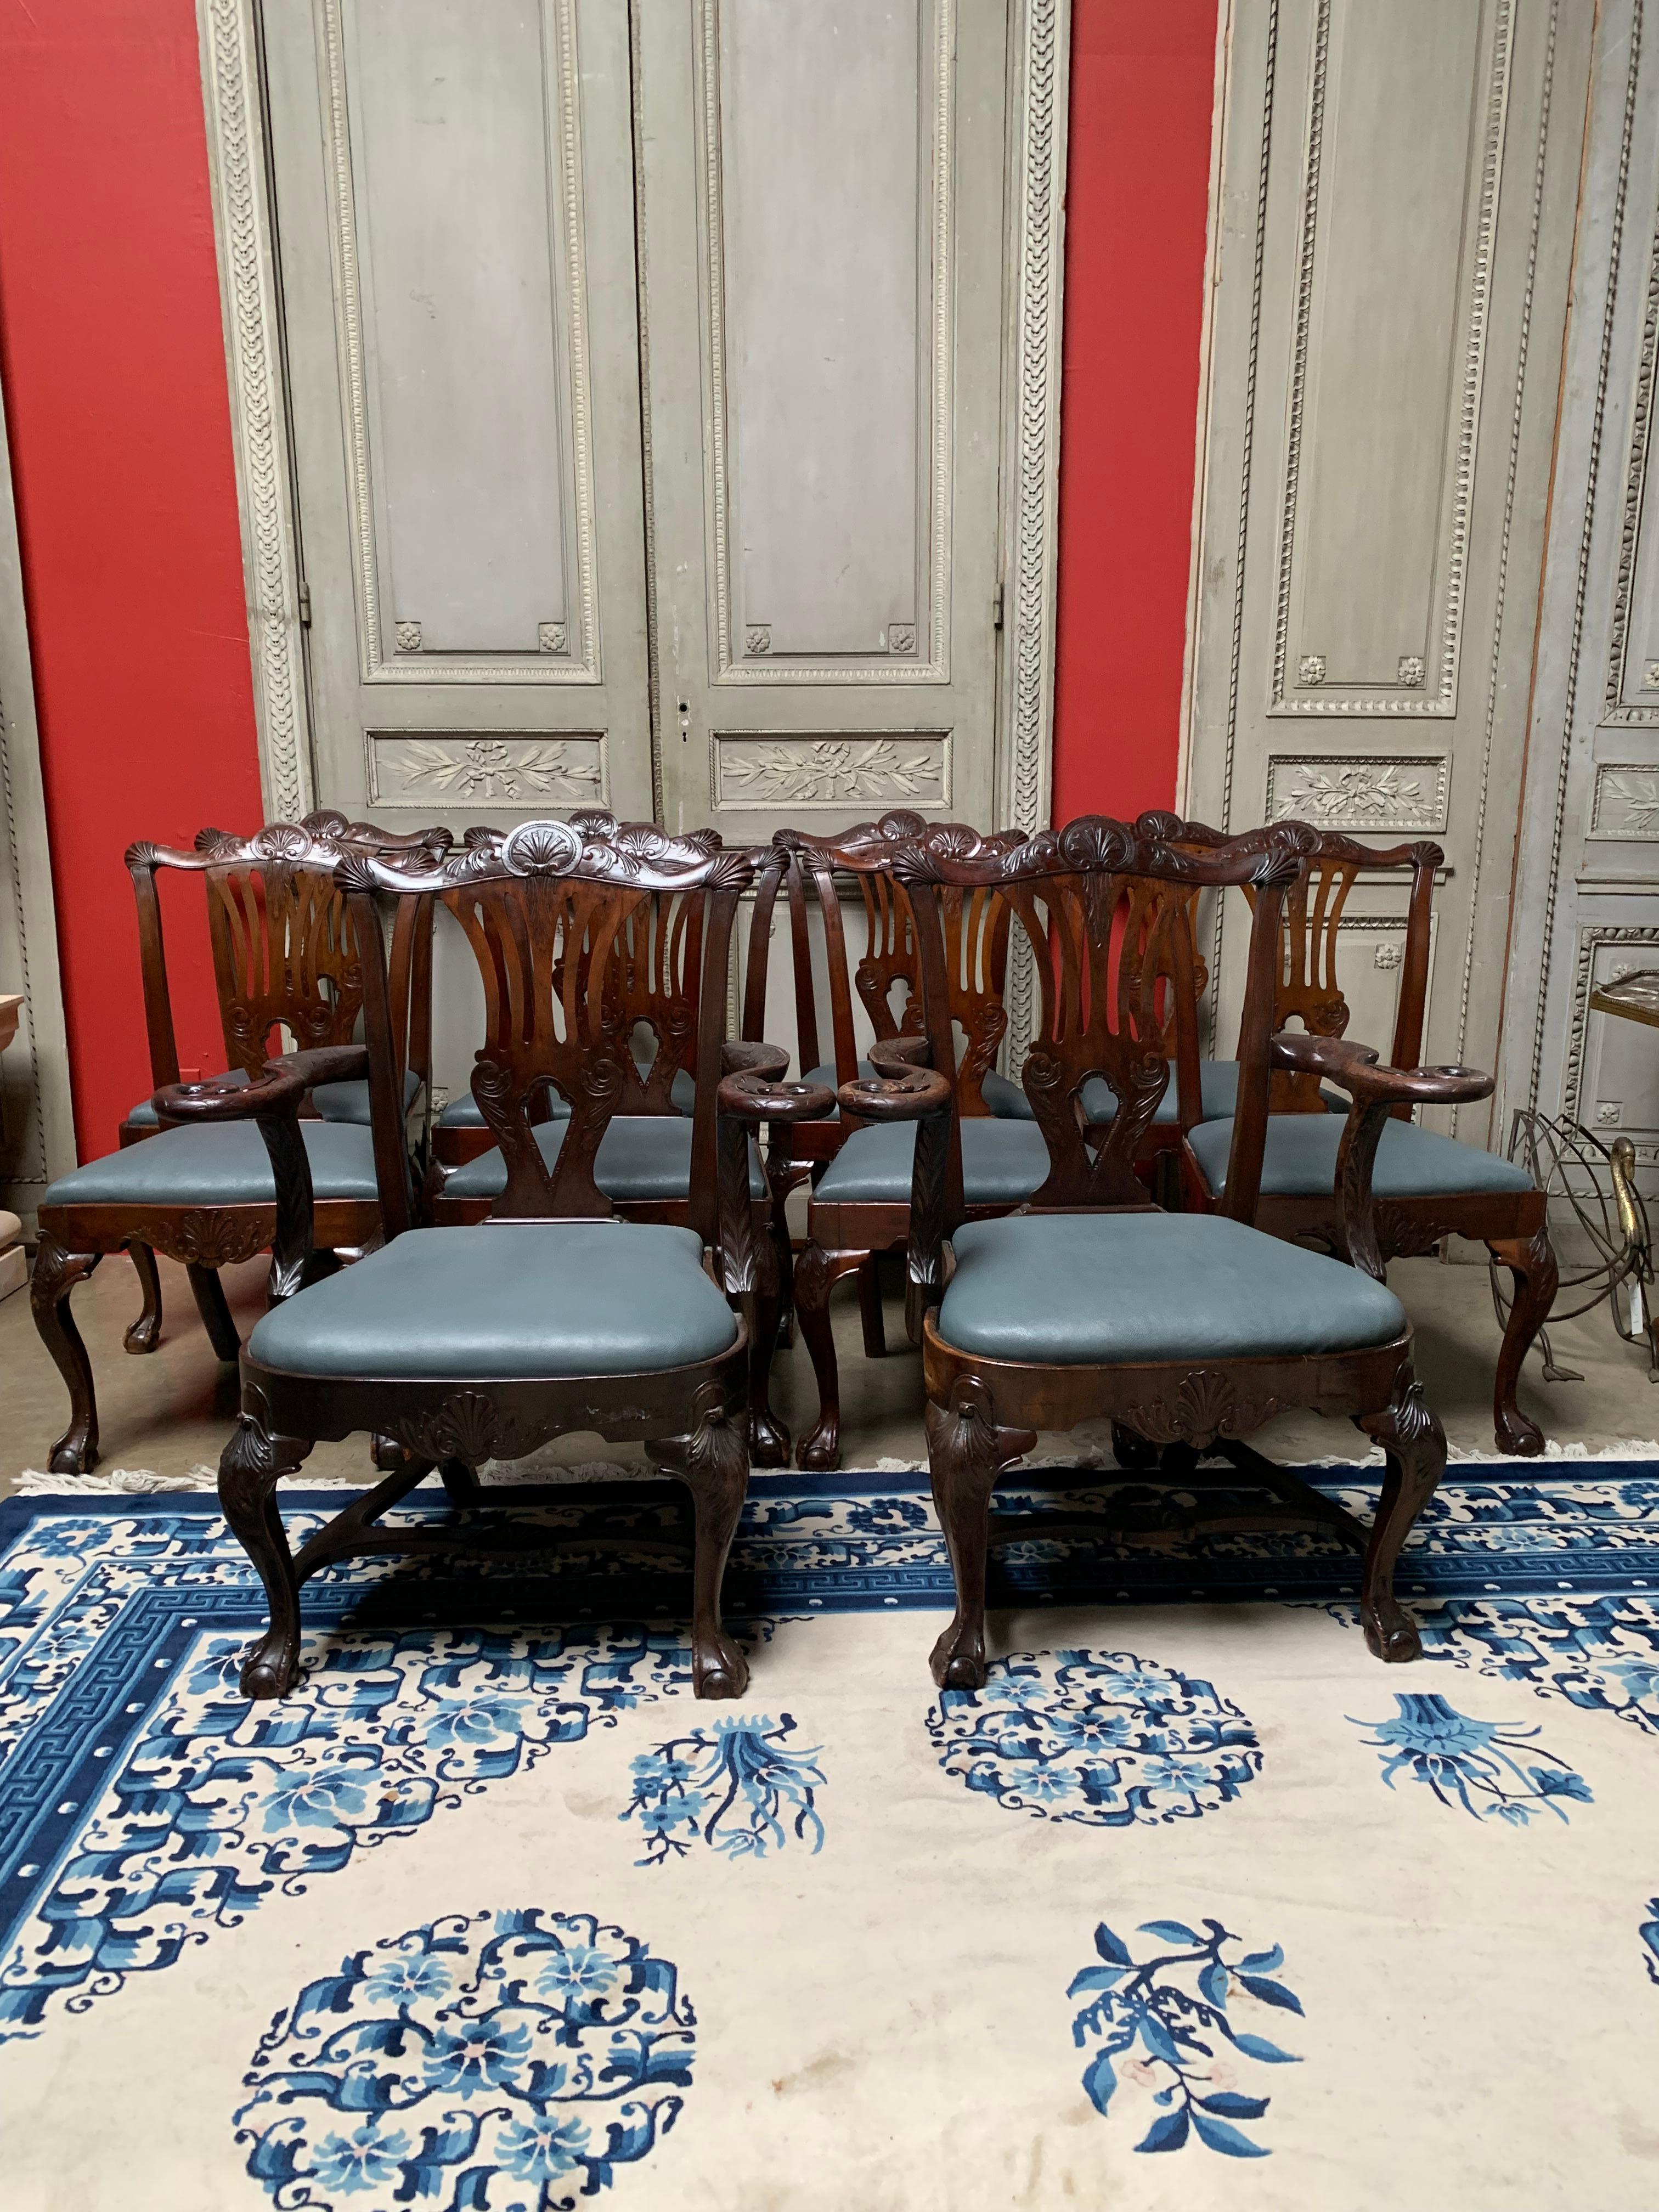 A set of 10 American Chippendale style carved mahogany dining chairs, 8 sides and 2 arms, from the north east coast of the United States, probably Philidelphia. 
They are beautifully carved, nicely scaled and are crafted of beautifully colored